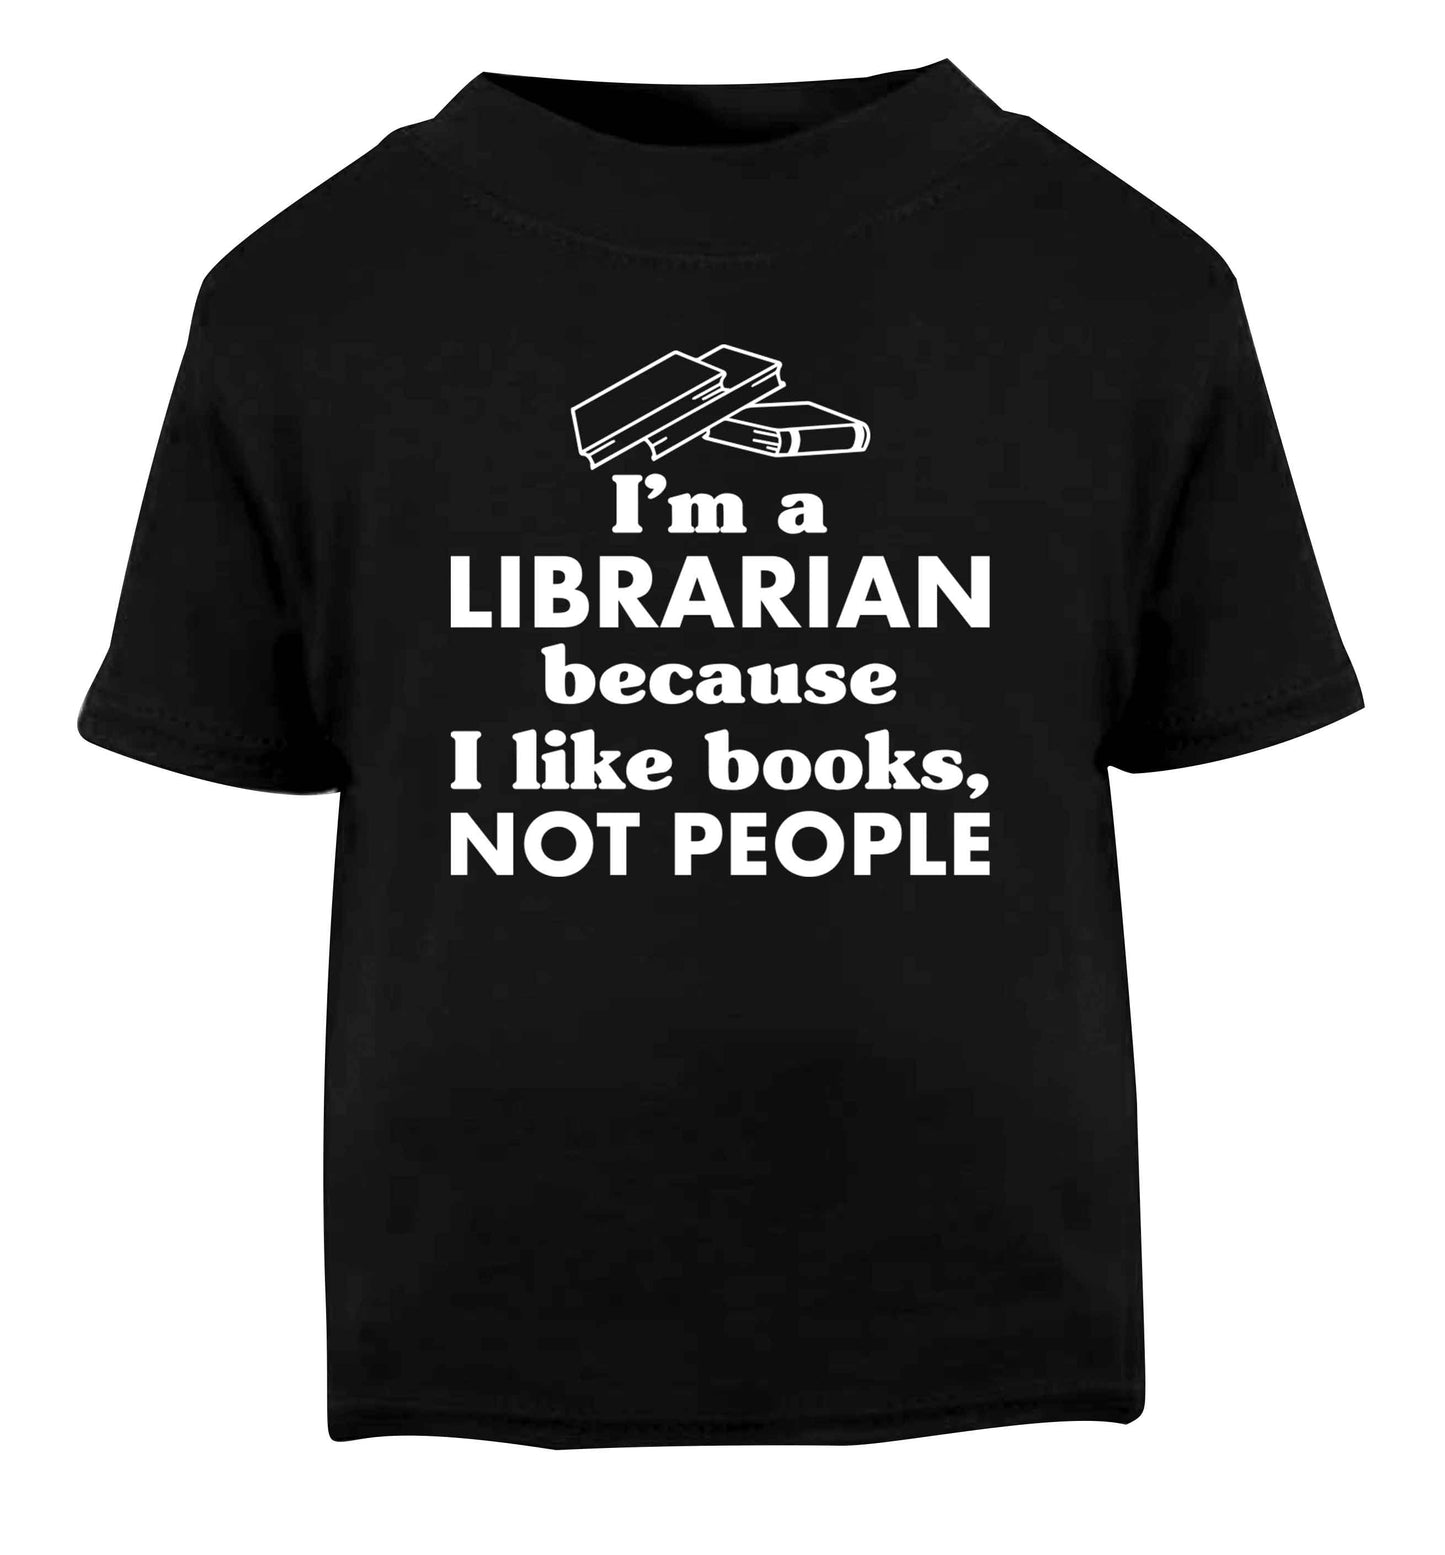 I'm a librarian because I like books not people Black Baby Toddler Tshirt 2 years